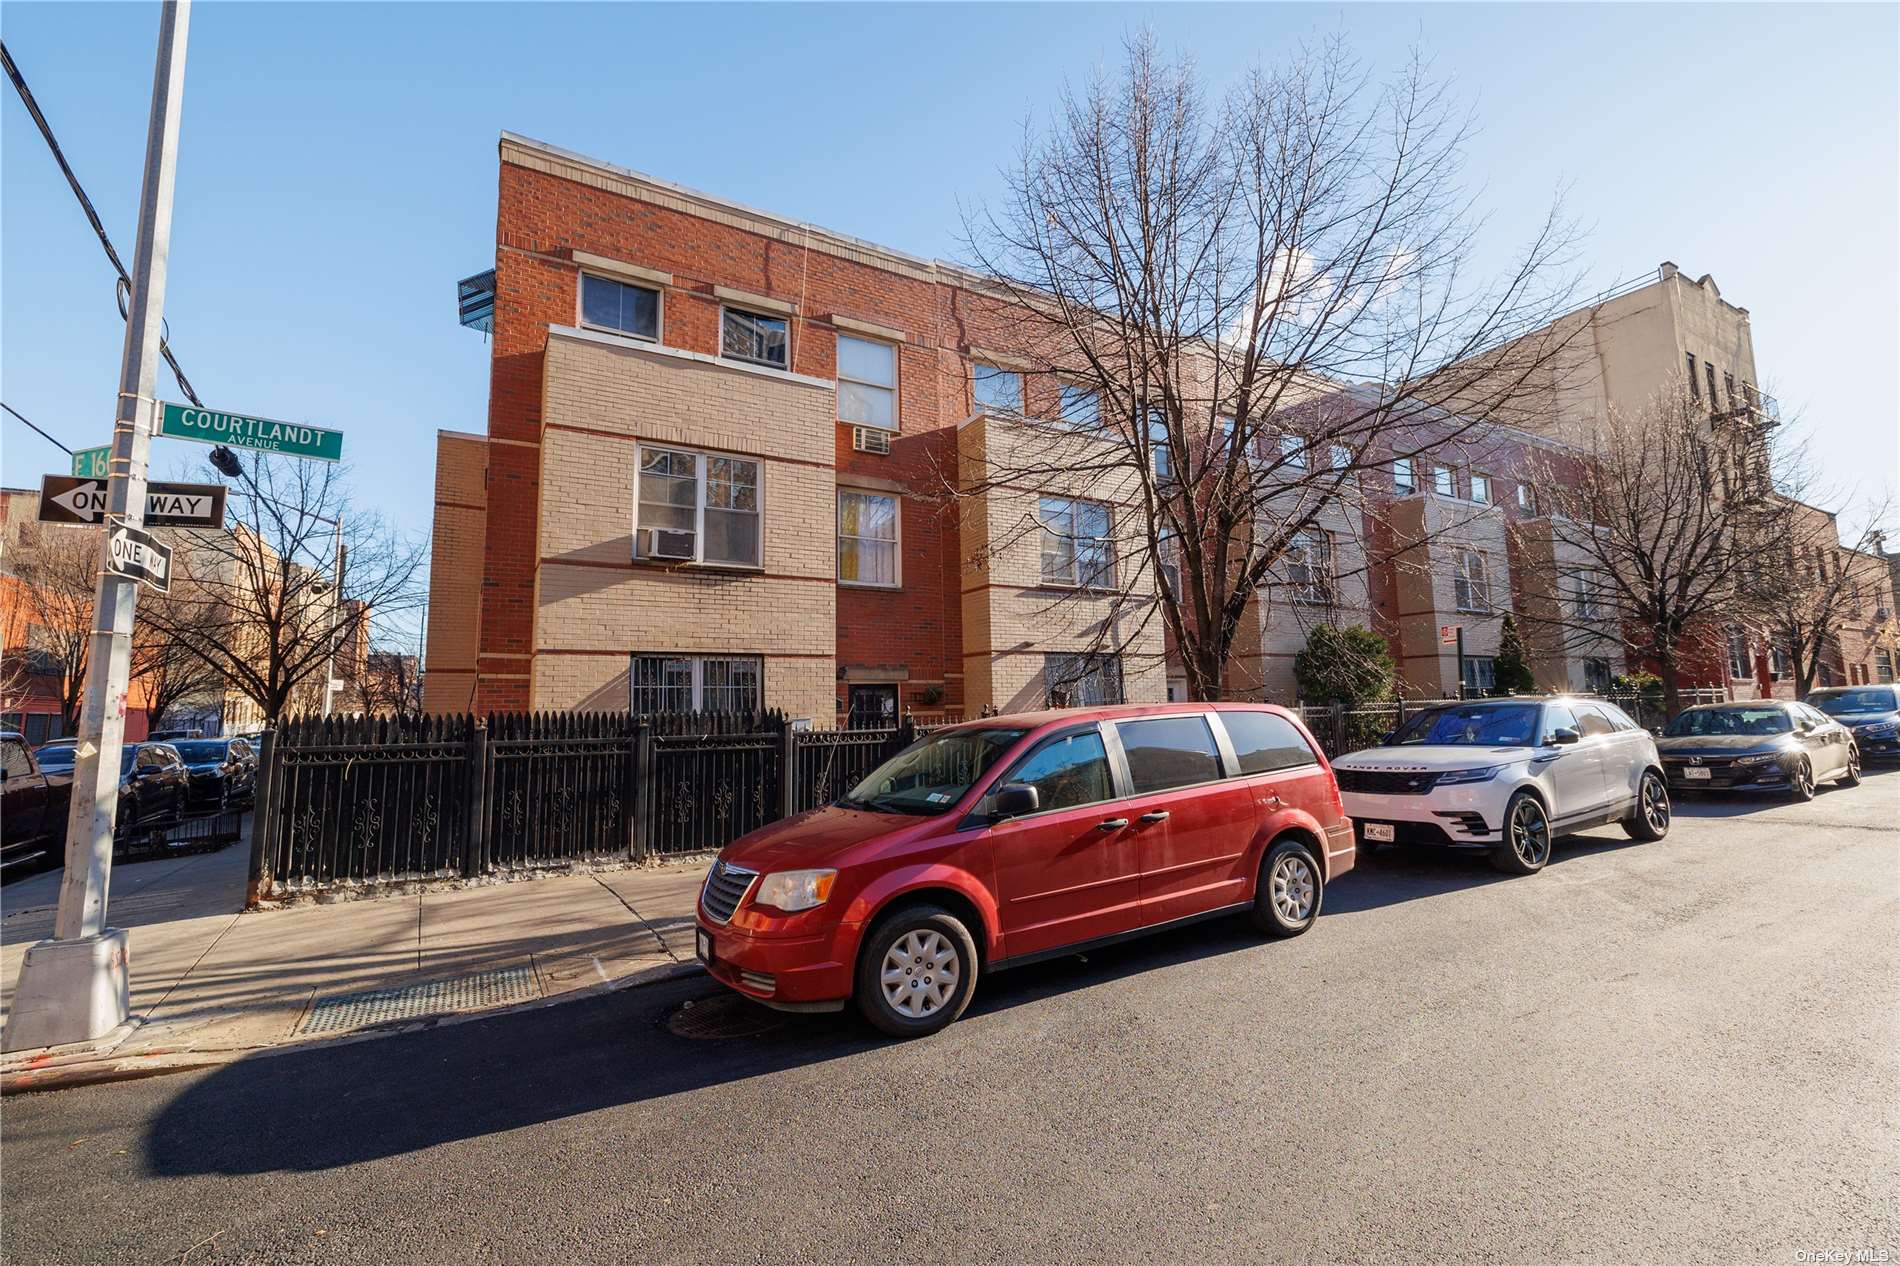 Property for Sale at 838 Courtlandt Avenue, Bronx, New York - Bedrooms: 6 
Bathrooms: 4 
Rooms: 25  - $950,000